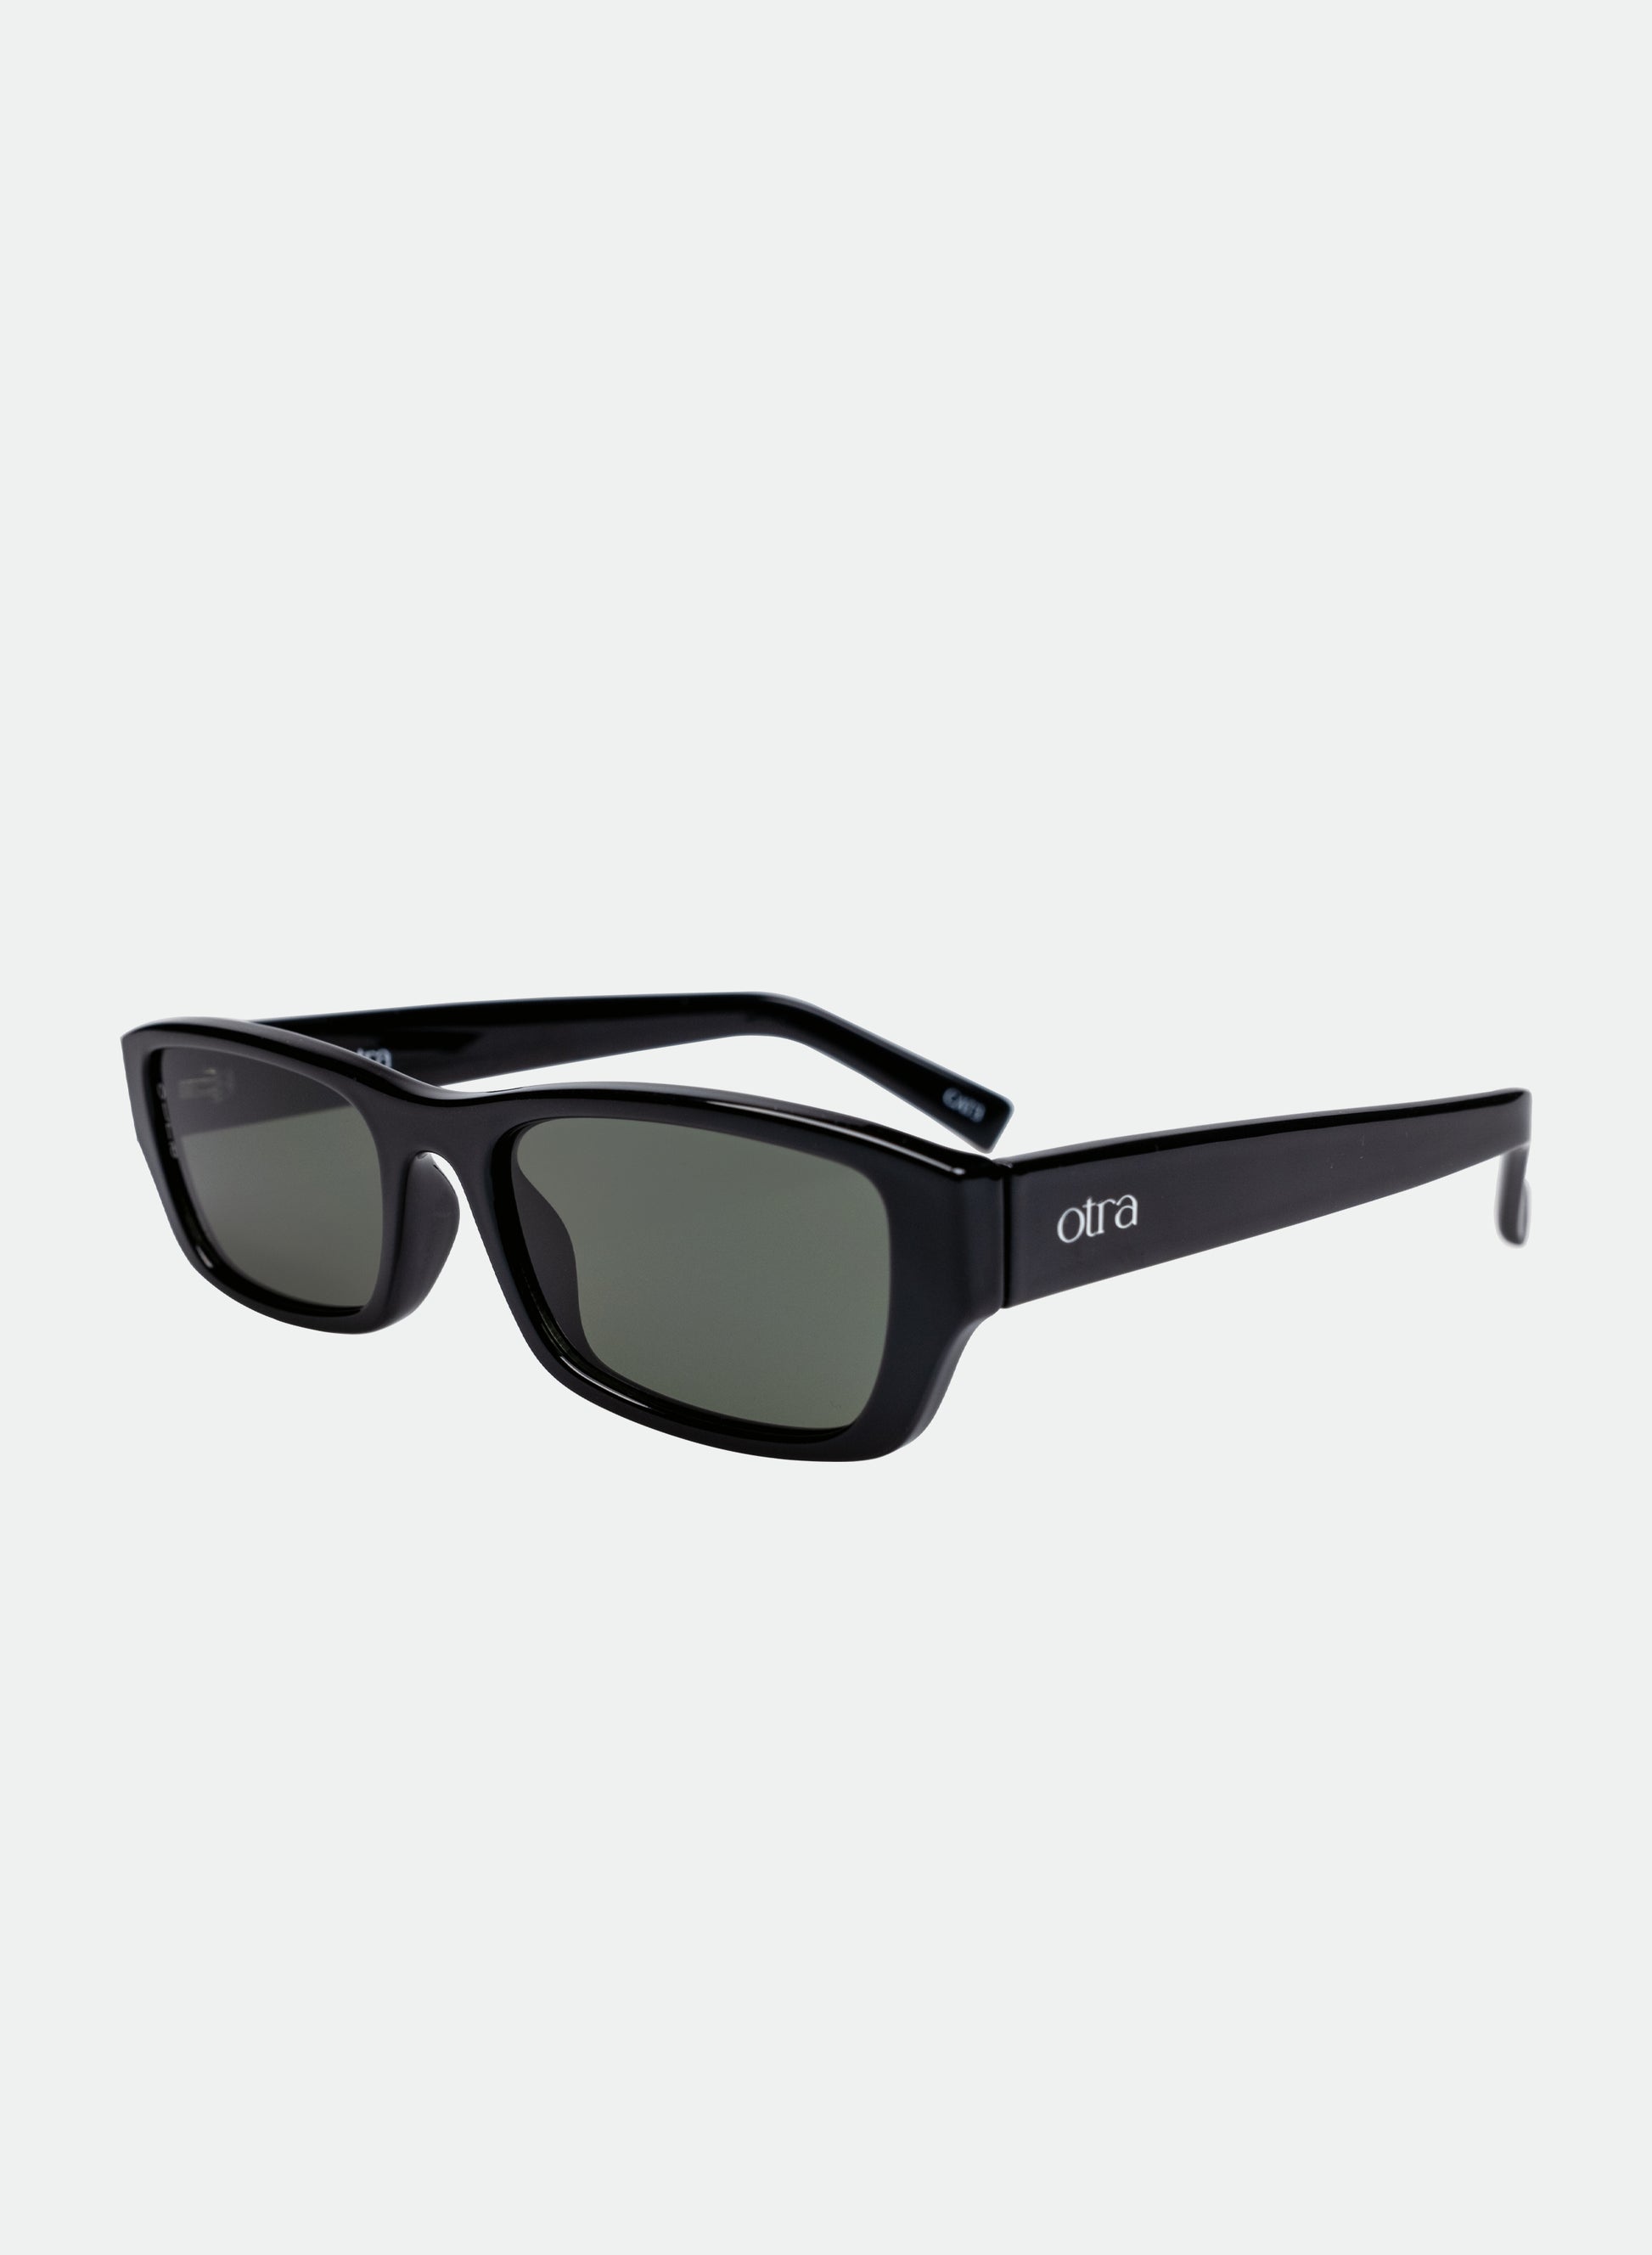 Mabel black sunglasses side view